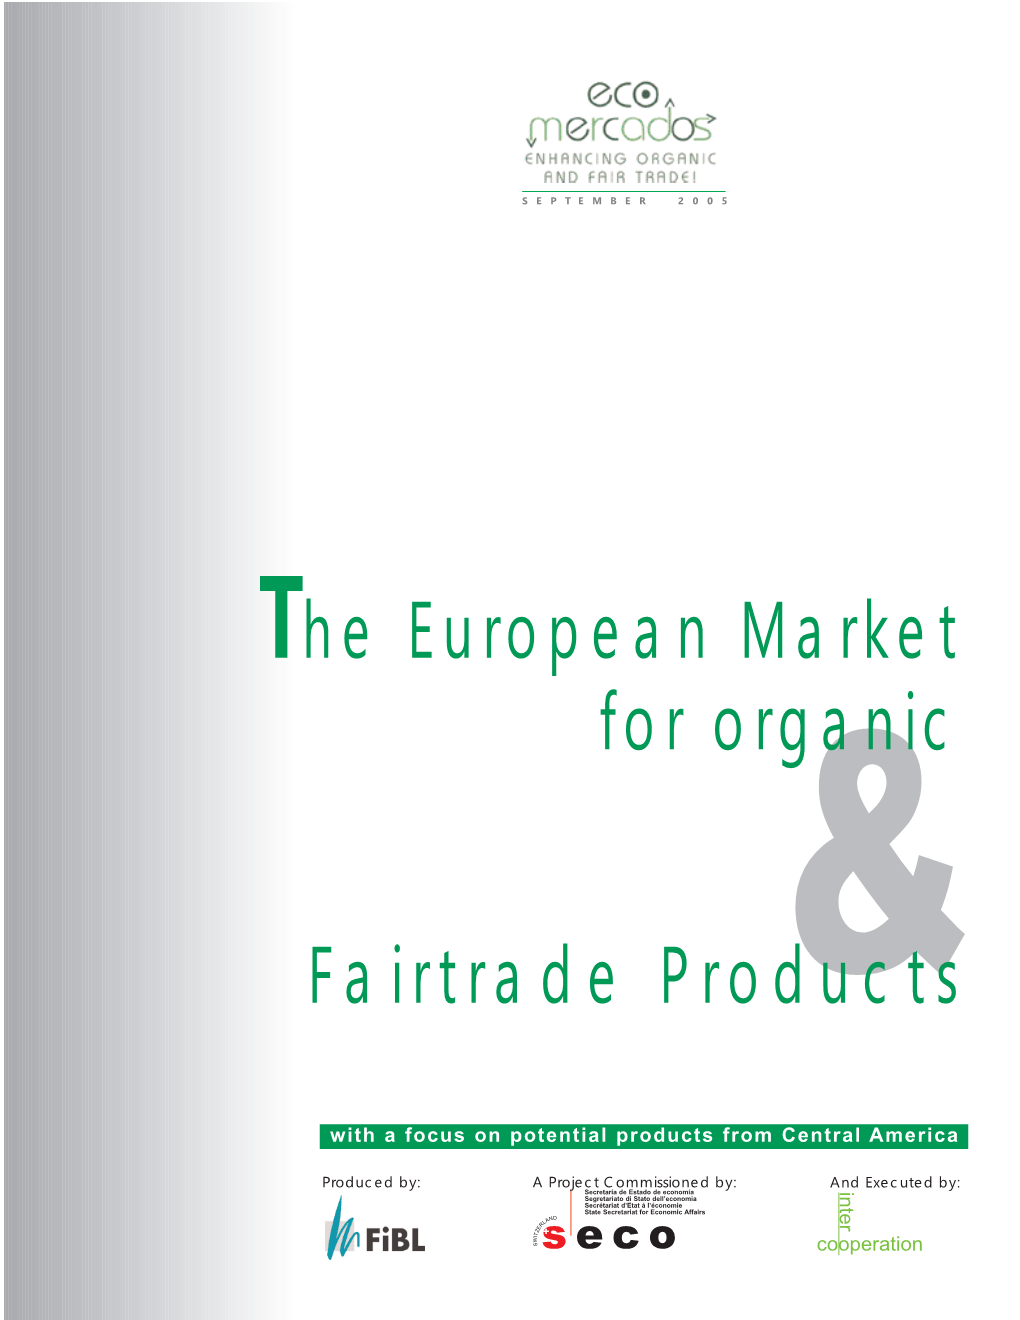 The European Market for Organic Fairtrade Products